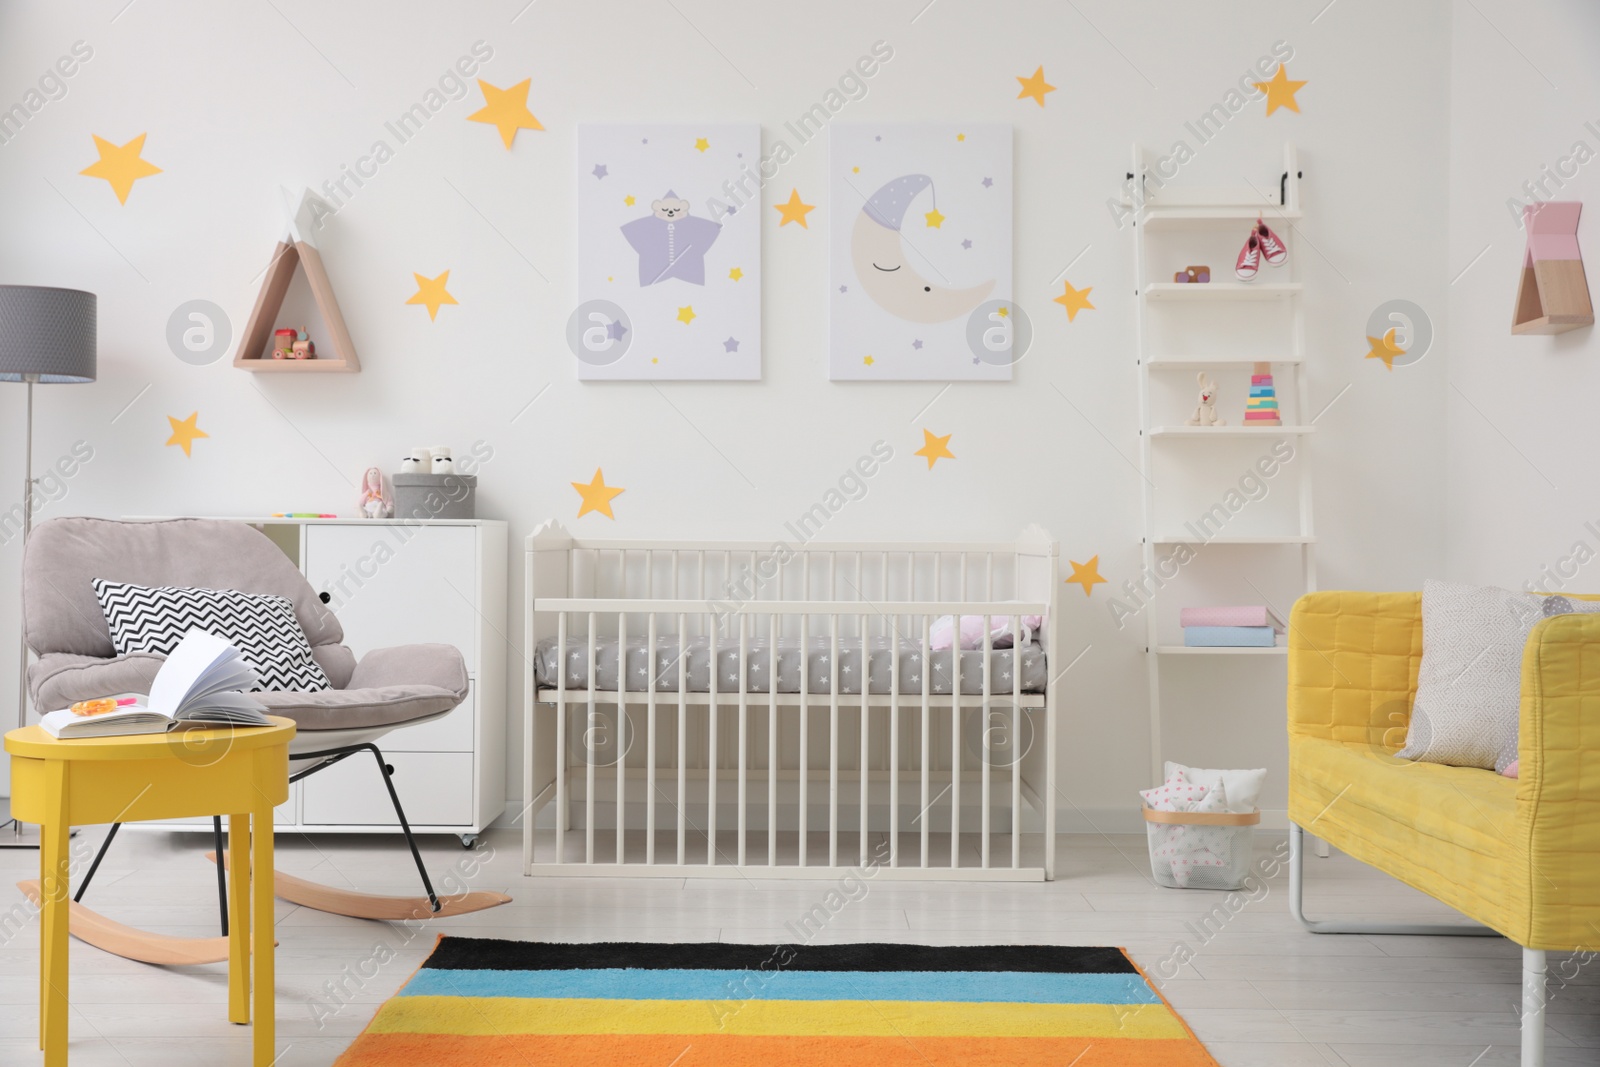 Photo of Stylish baby room interior with crib, rocking chair and sofa